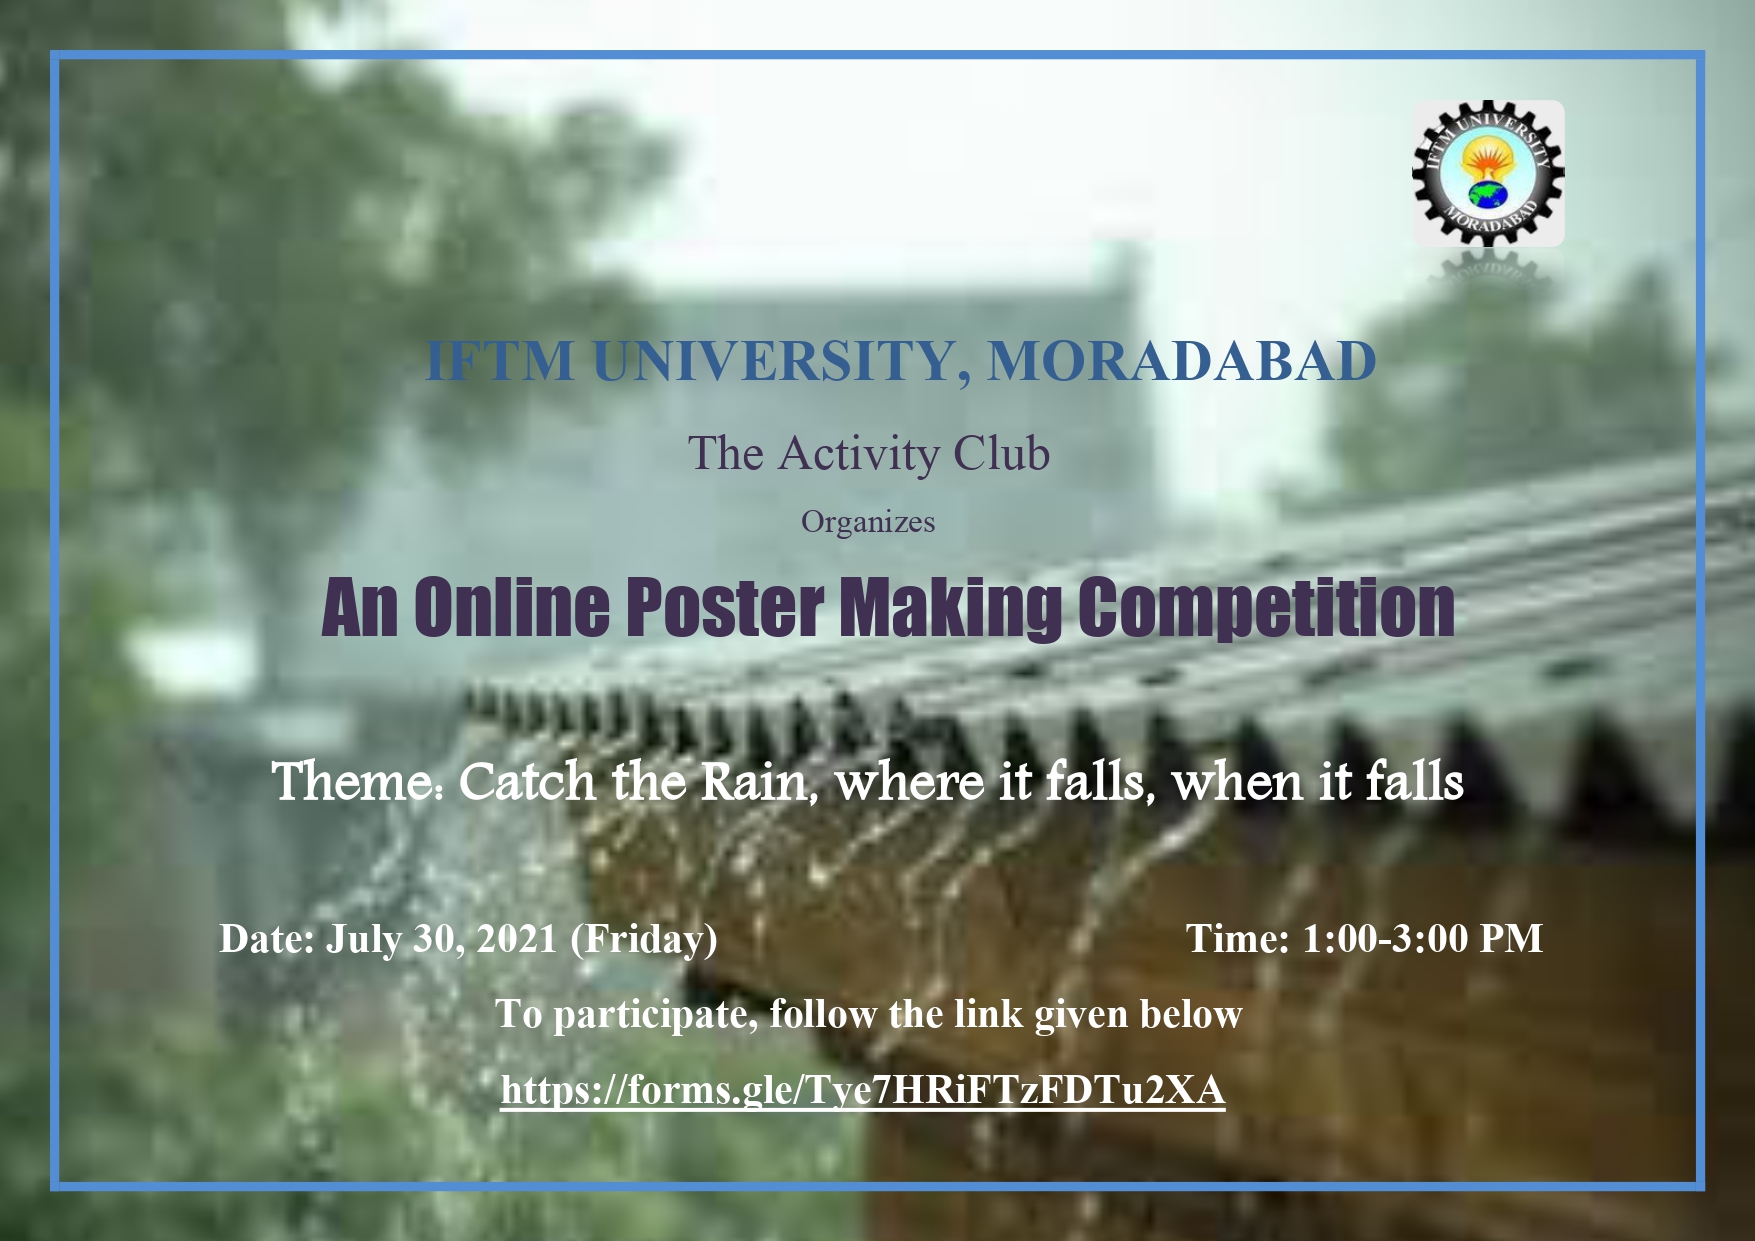 Online Poster Making Competition Theme: Catch the Rain, where it falls, when it falls.